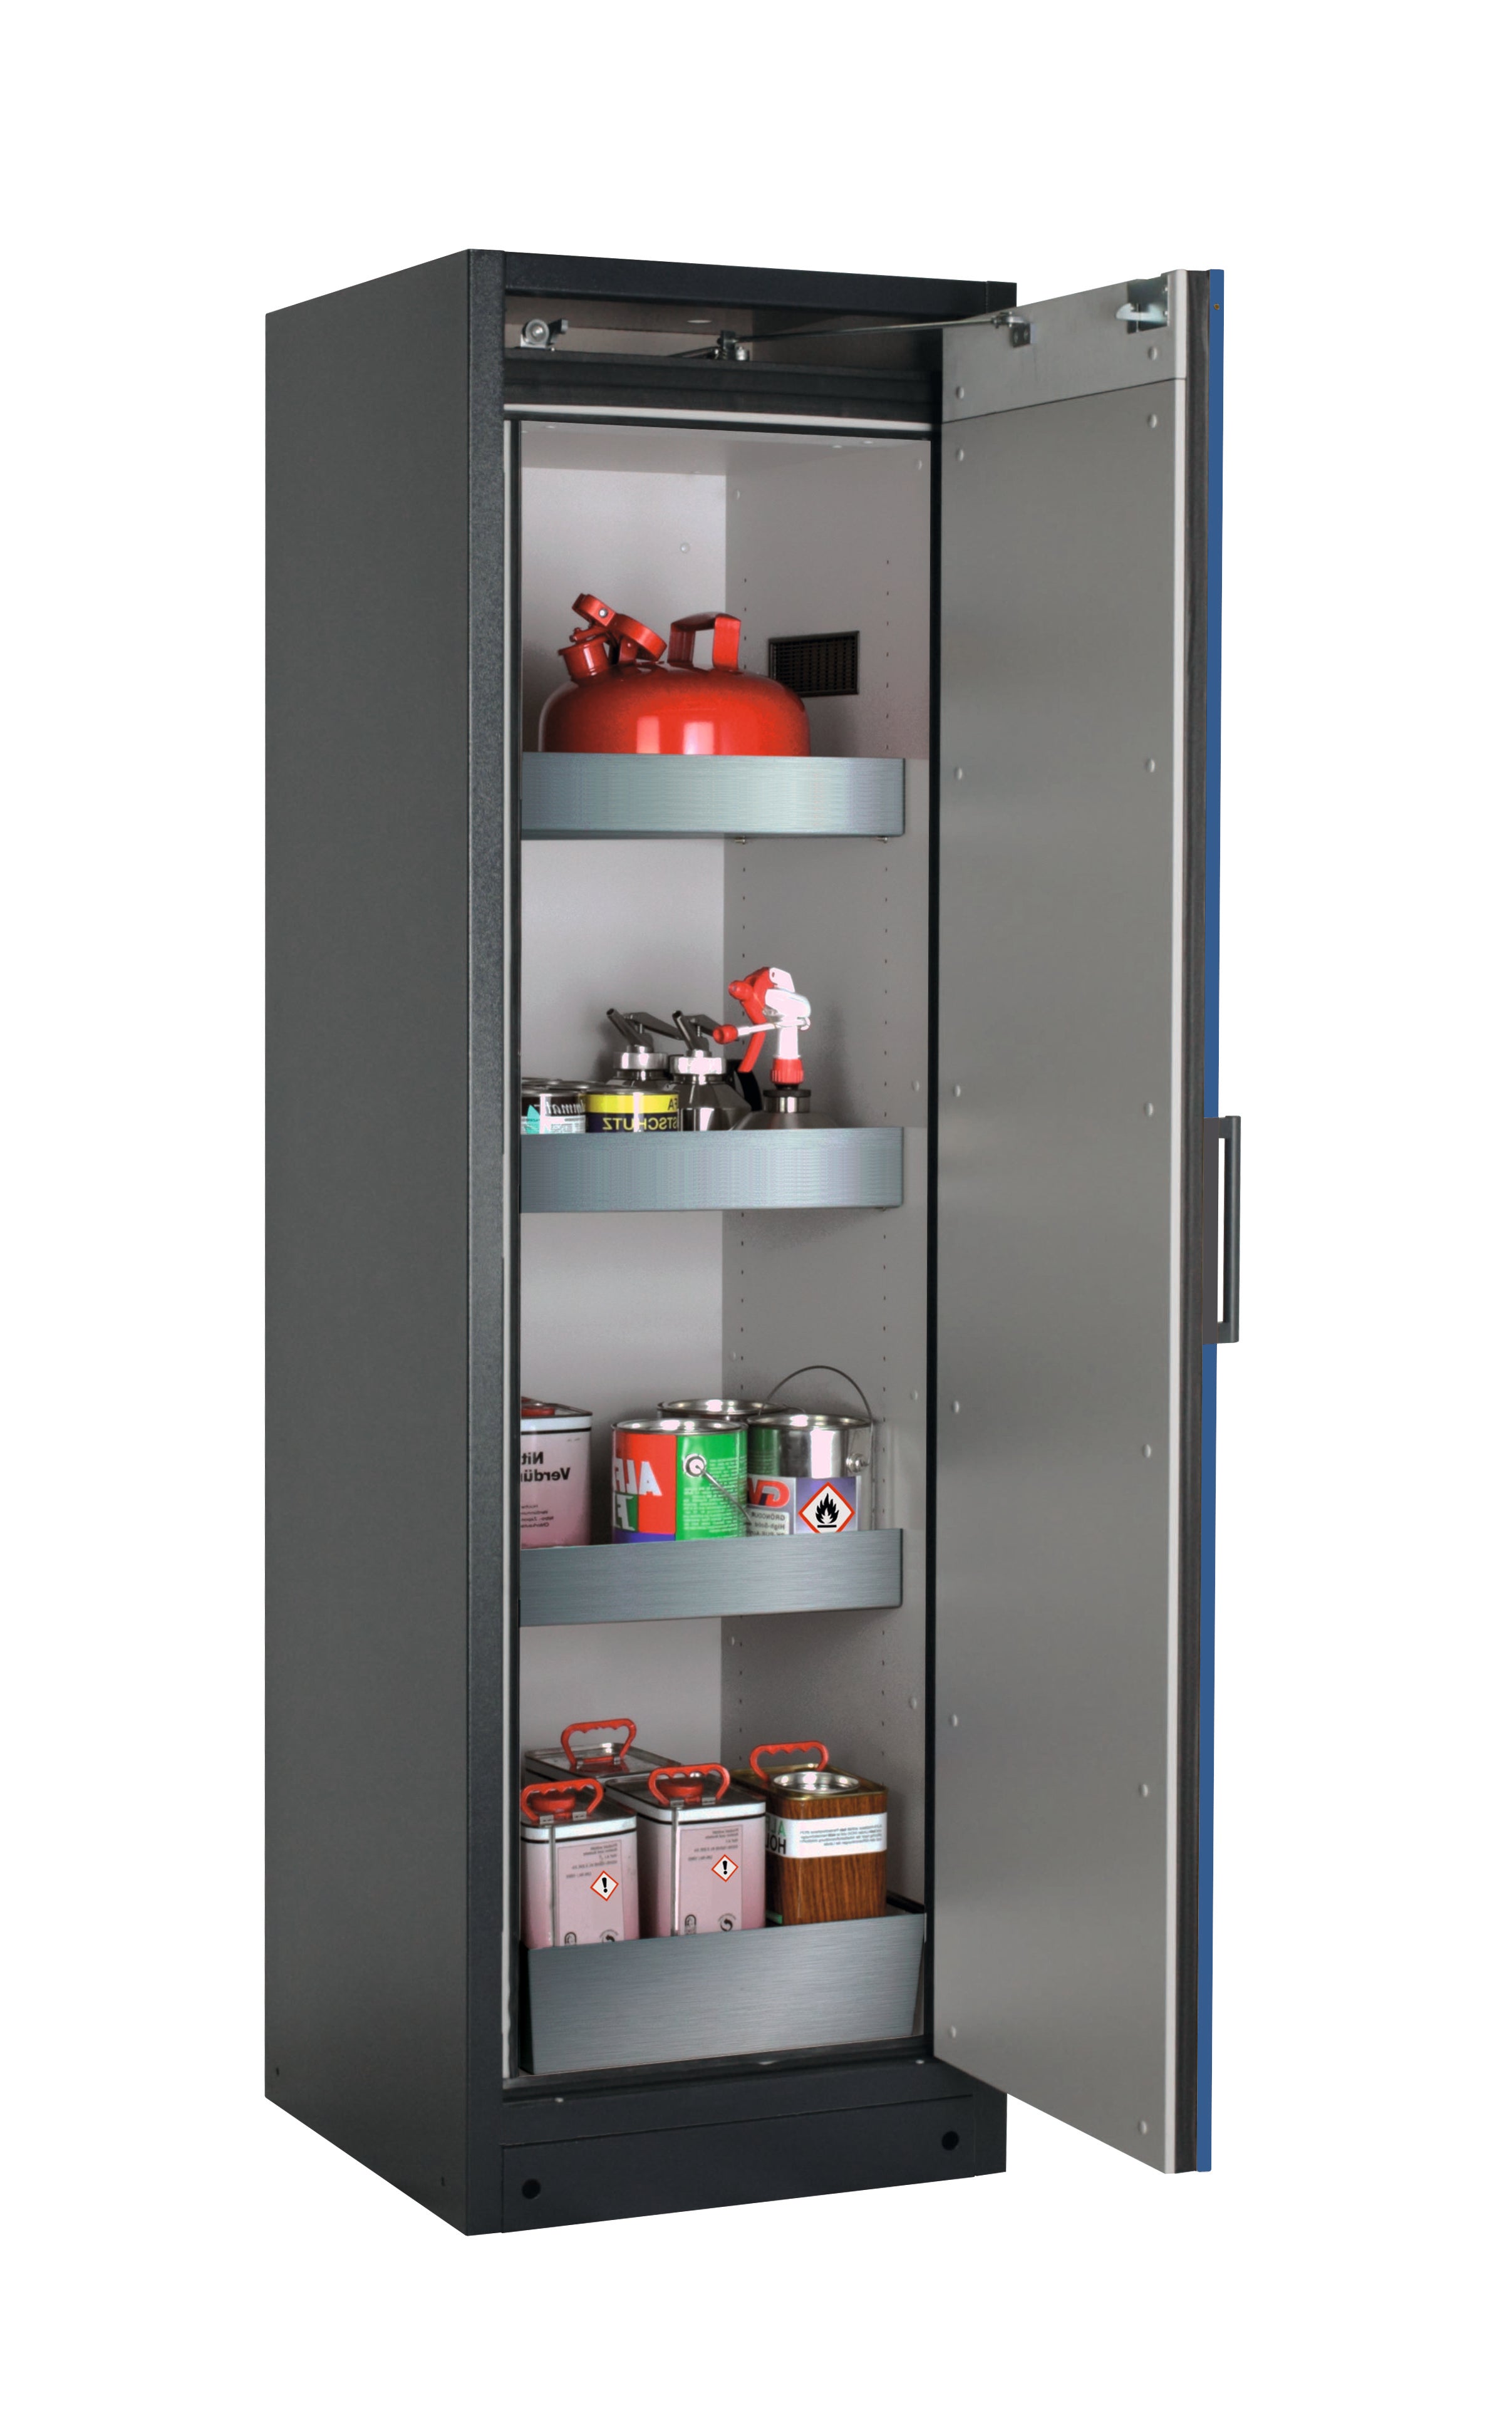 Type 90 safety storage cabinet Q-CLASSIC-90 model Q90.195.060.R in gentian blue RAL 5010 with 3x tray shelf (standard) (stainless steel 1.4301),